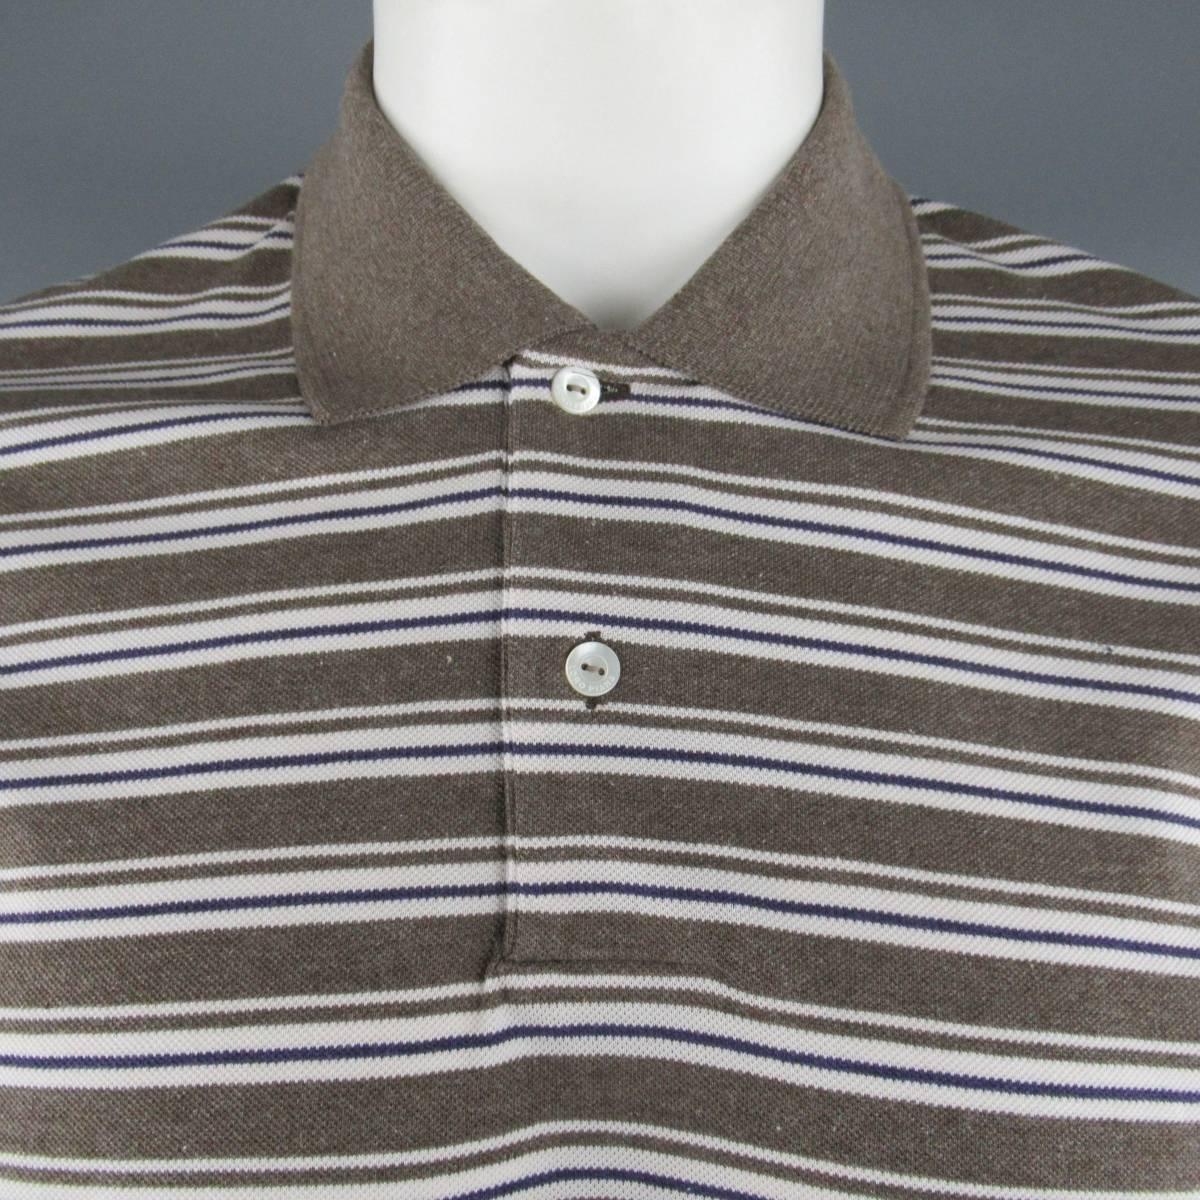 Classic LORO PIANA polo comes in taupe cotton pique with all over white & navy stripe pattern and contrast collar. Made in Italy.
 
New with Tags.
Marked: XXL
 
Measurements:
 
Shoulder: 18 in.
Chest: 48 in.
Sleeve: 9.5 in.
Length: 28 in.

SKU: 84036